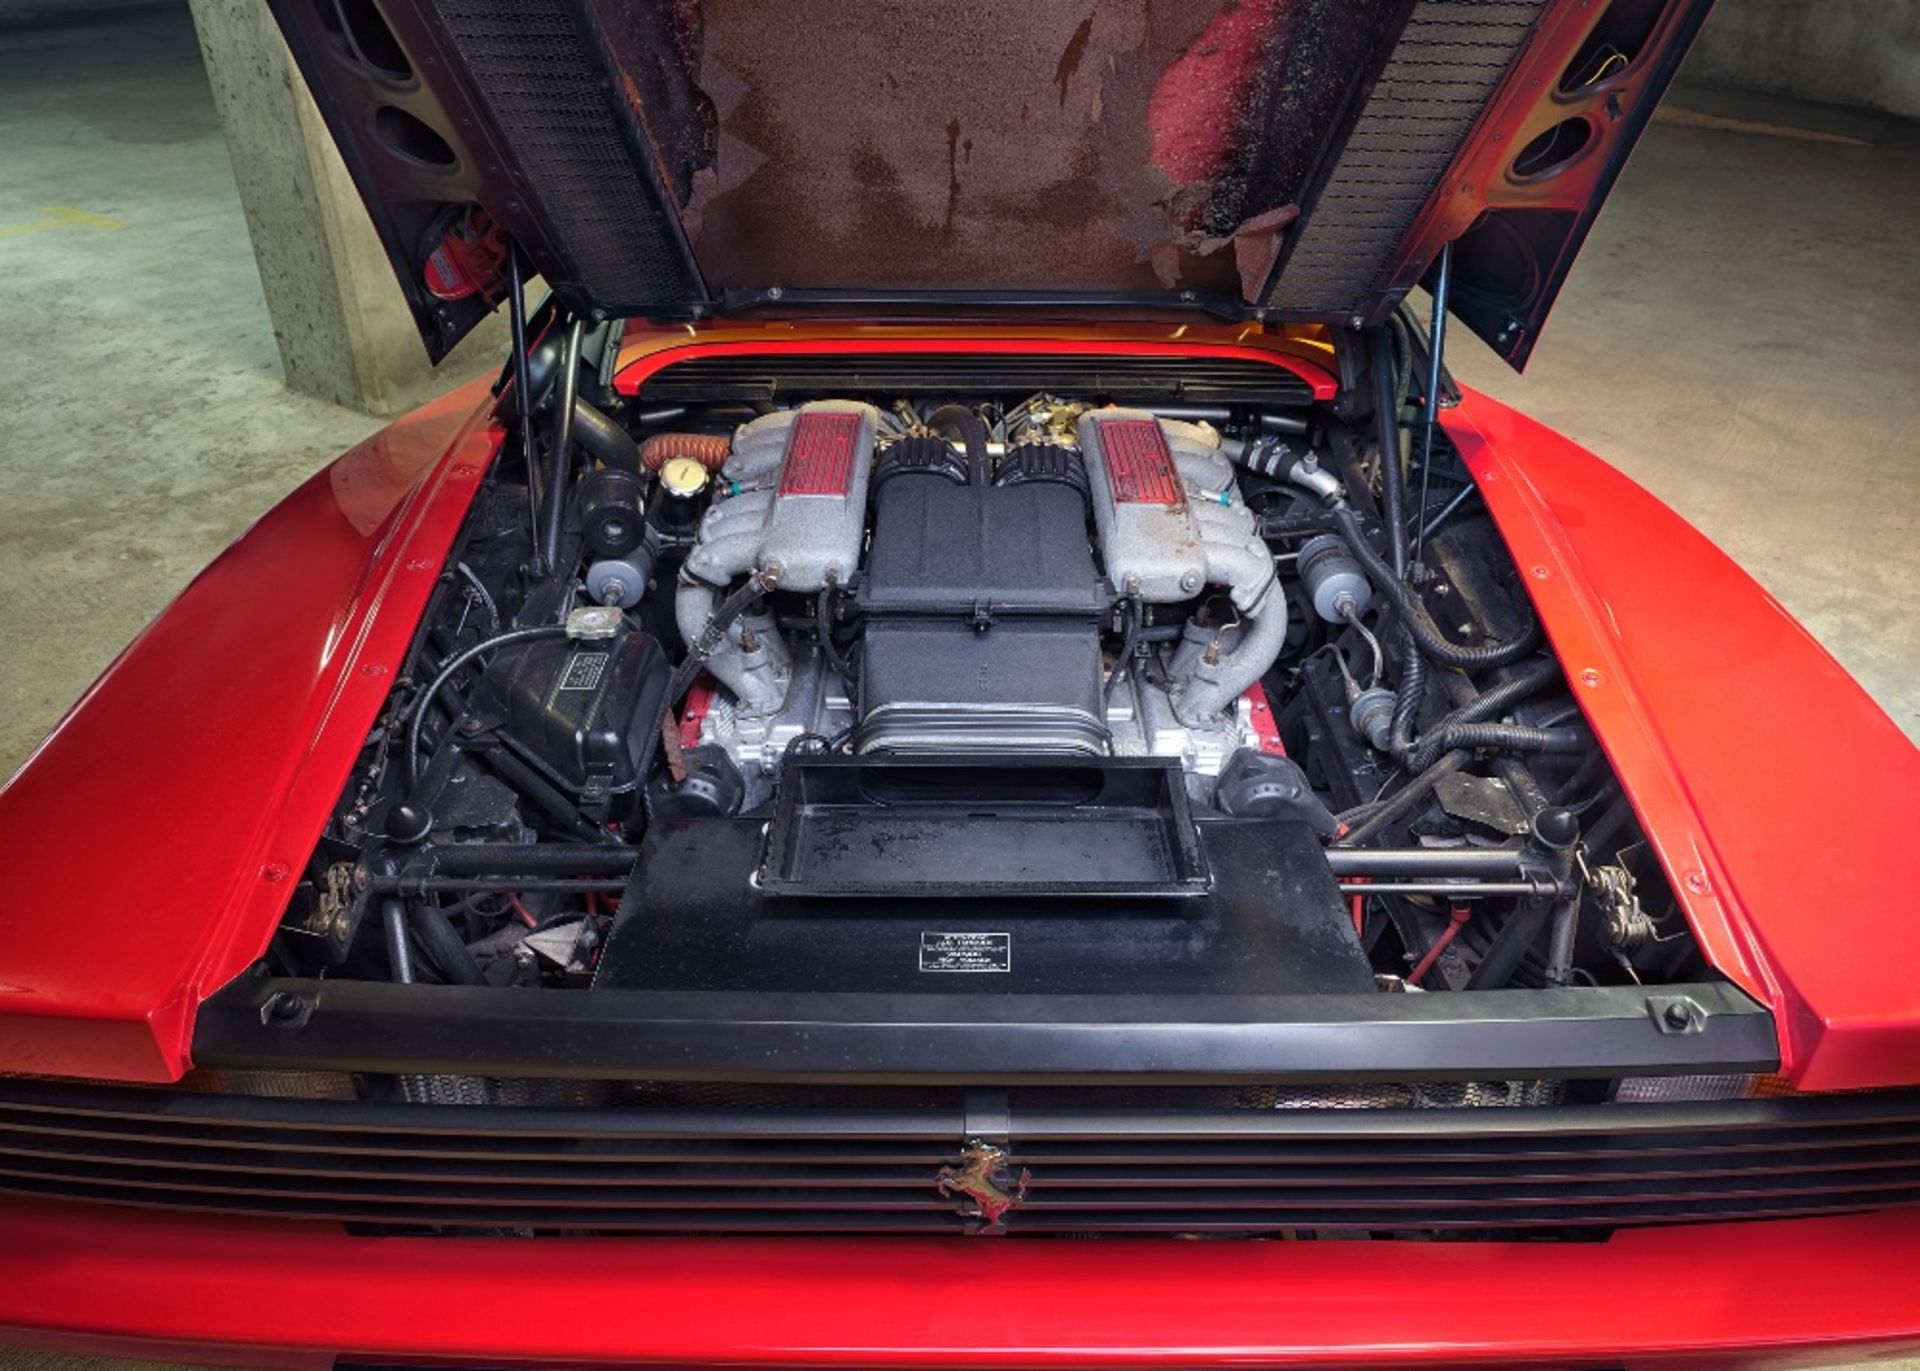 1991 FERRARI TESTAROSSA Registration Number: UK Taxes Paid     Chassis Number: ZFFSM17A6M0088562 - Image 15 of 24